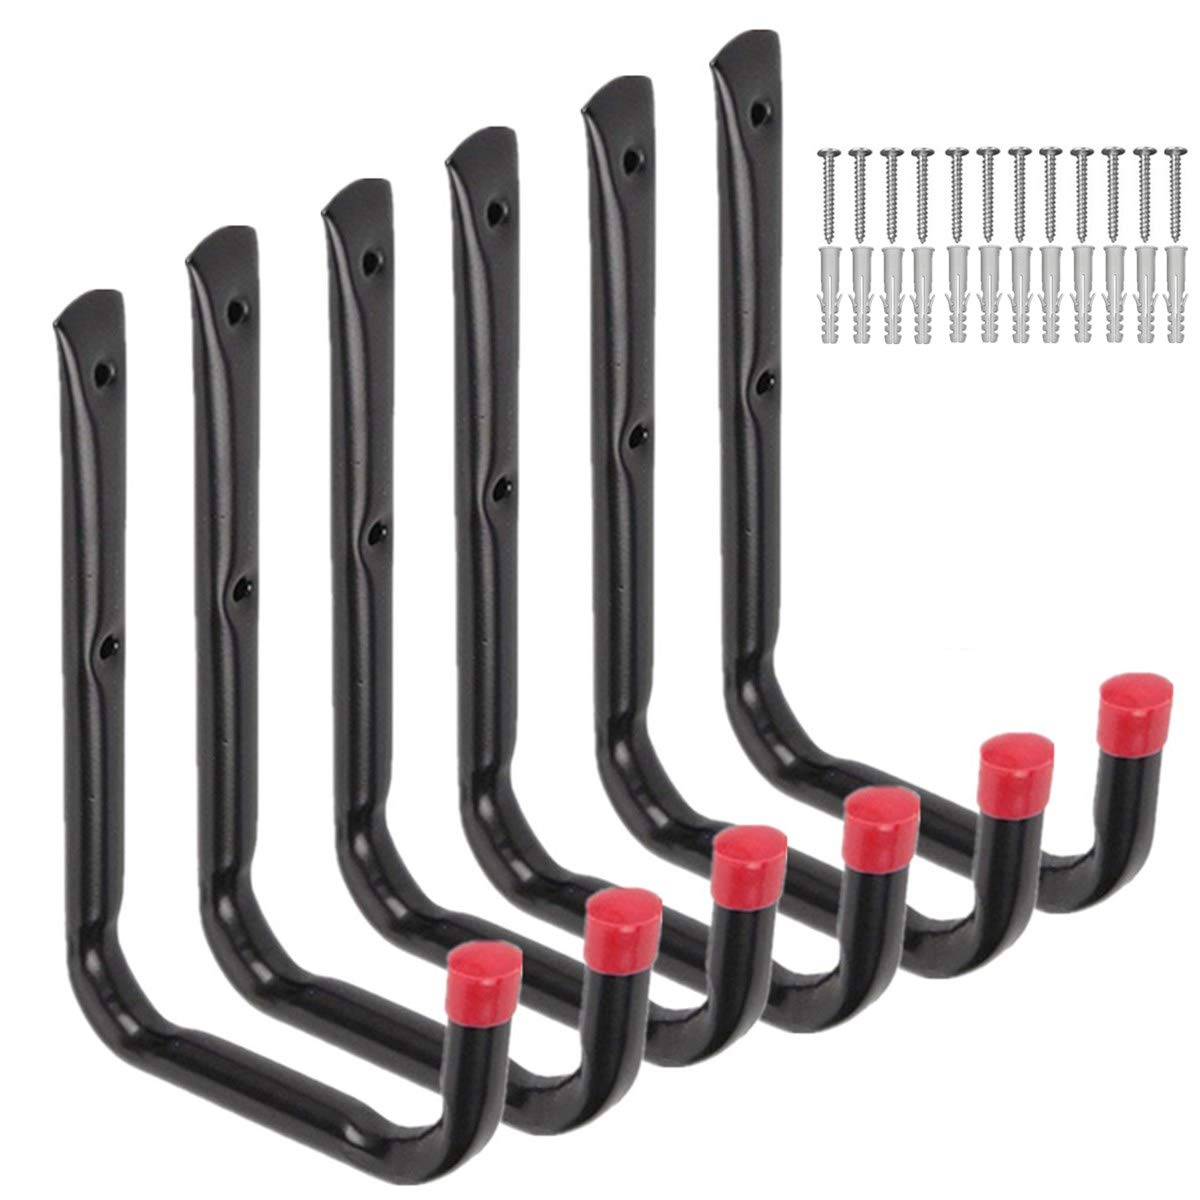 Heavy Duty Garage Utility U Hooks,Wall Mount Garage Hanging Storage Hook for Ladders, Bicycle and Tools 6 Pack (Black)